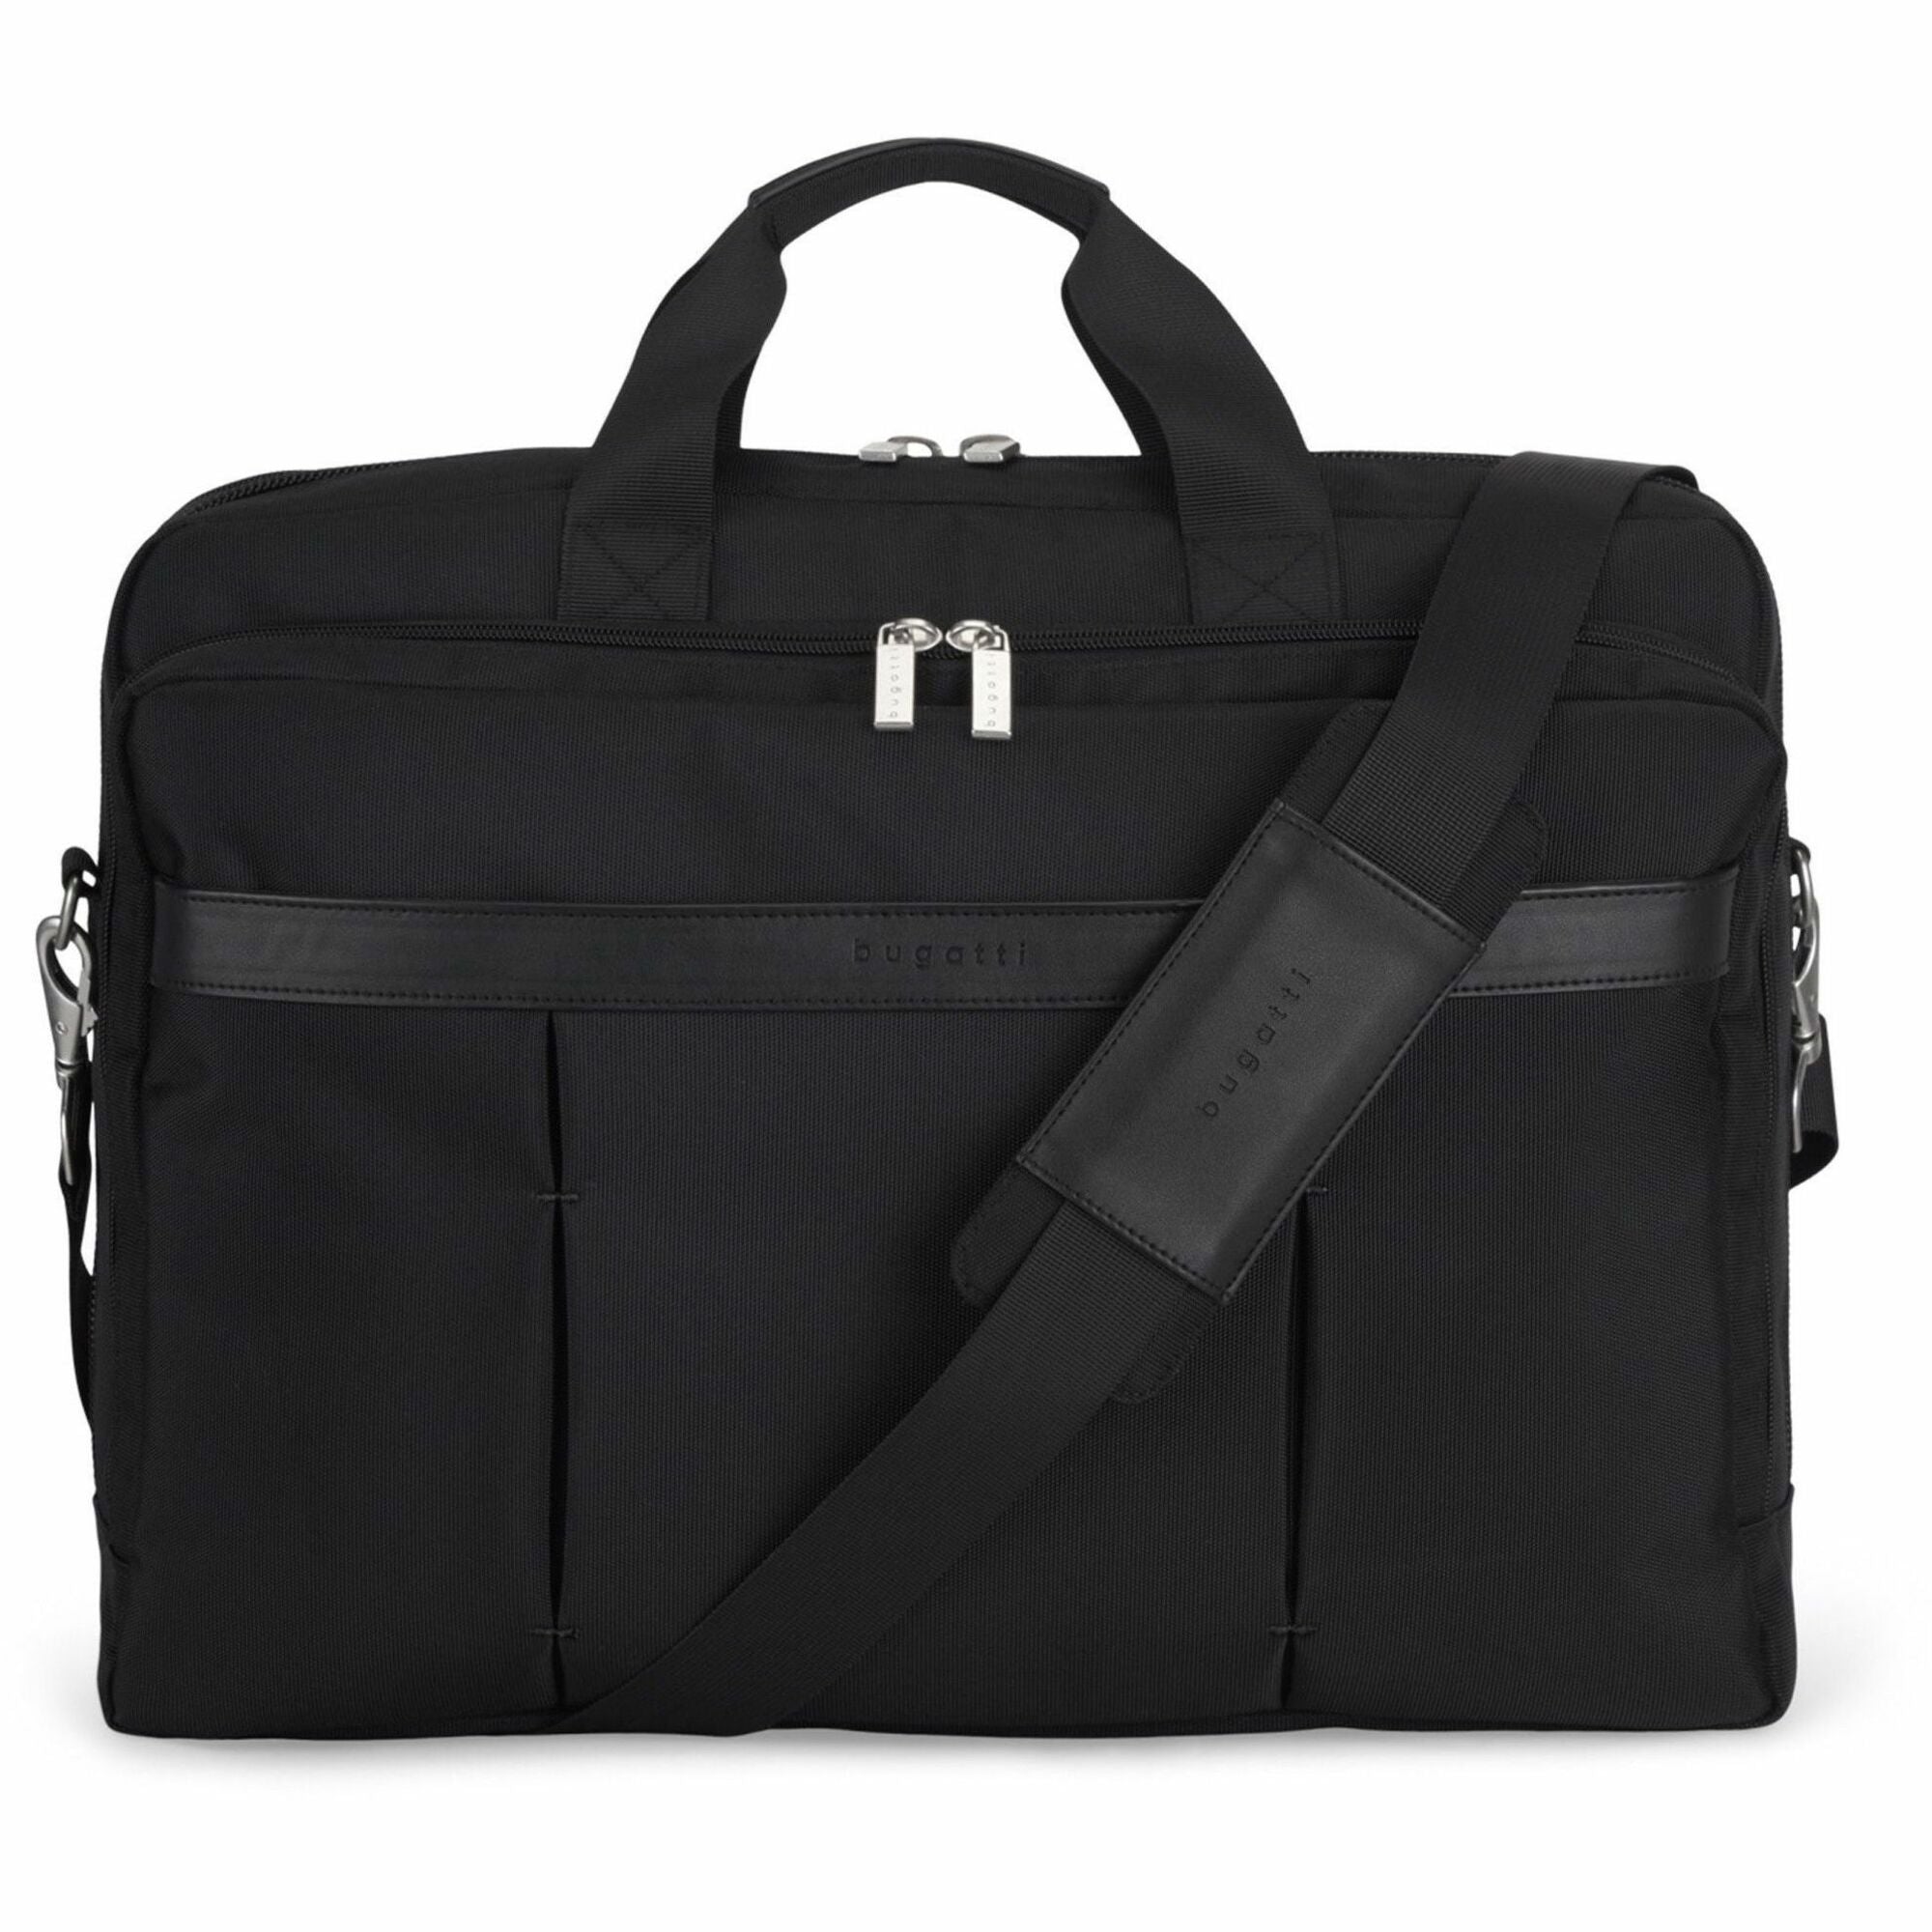 bugatti Gregory Carrying Case (Briefcase) for 17" to 17.3" Notebook - Black - Damage Resistant, Tangle Resistant Shoulder Strap - Ballistic Nylon Body - Trolley Strap, Handle, Shoulder Strap - 13" Height x 8" Width x 18" Depth - 1 Each - 1